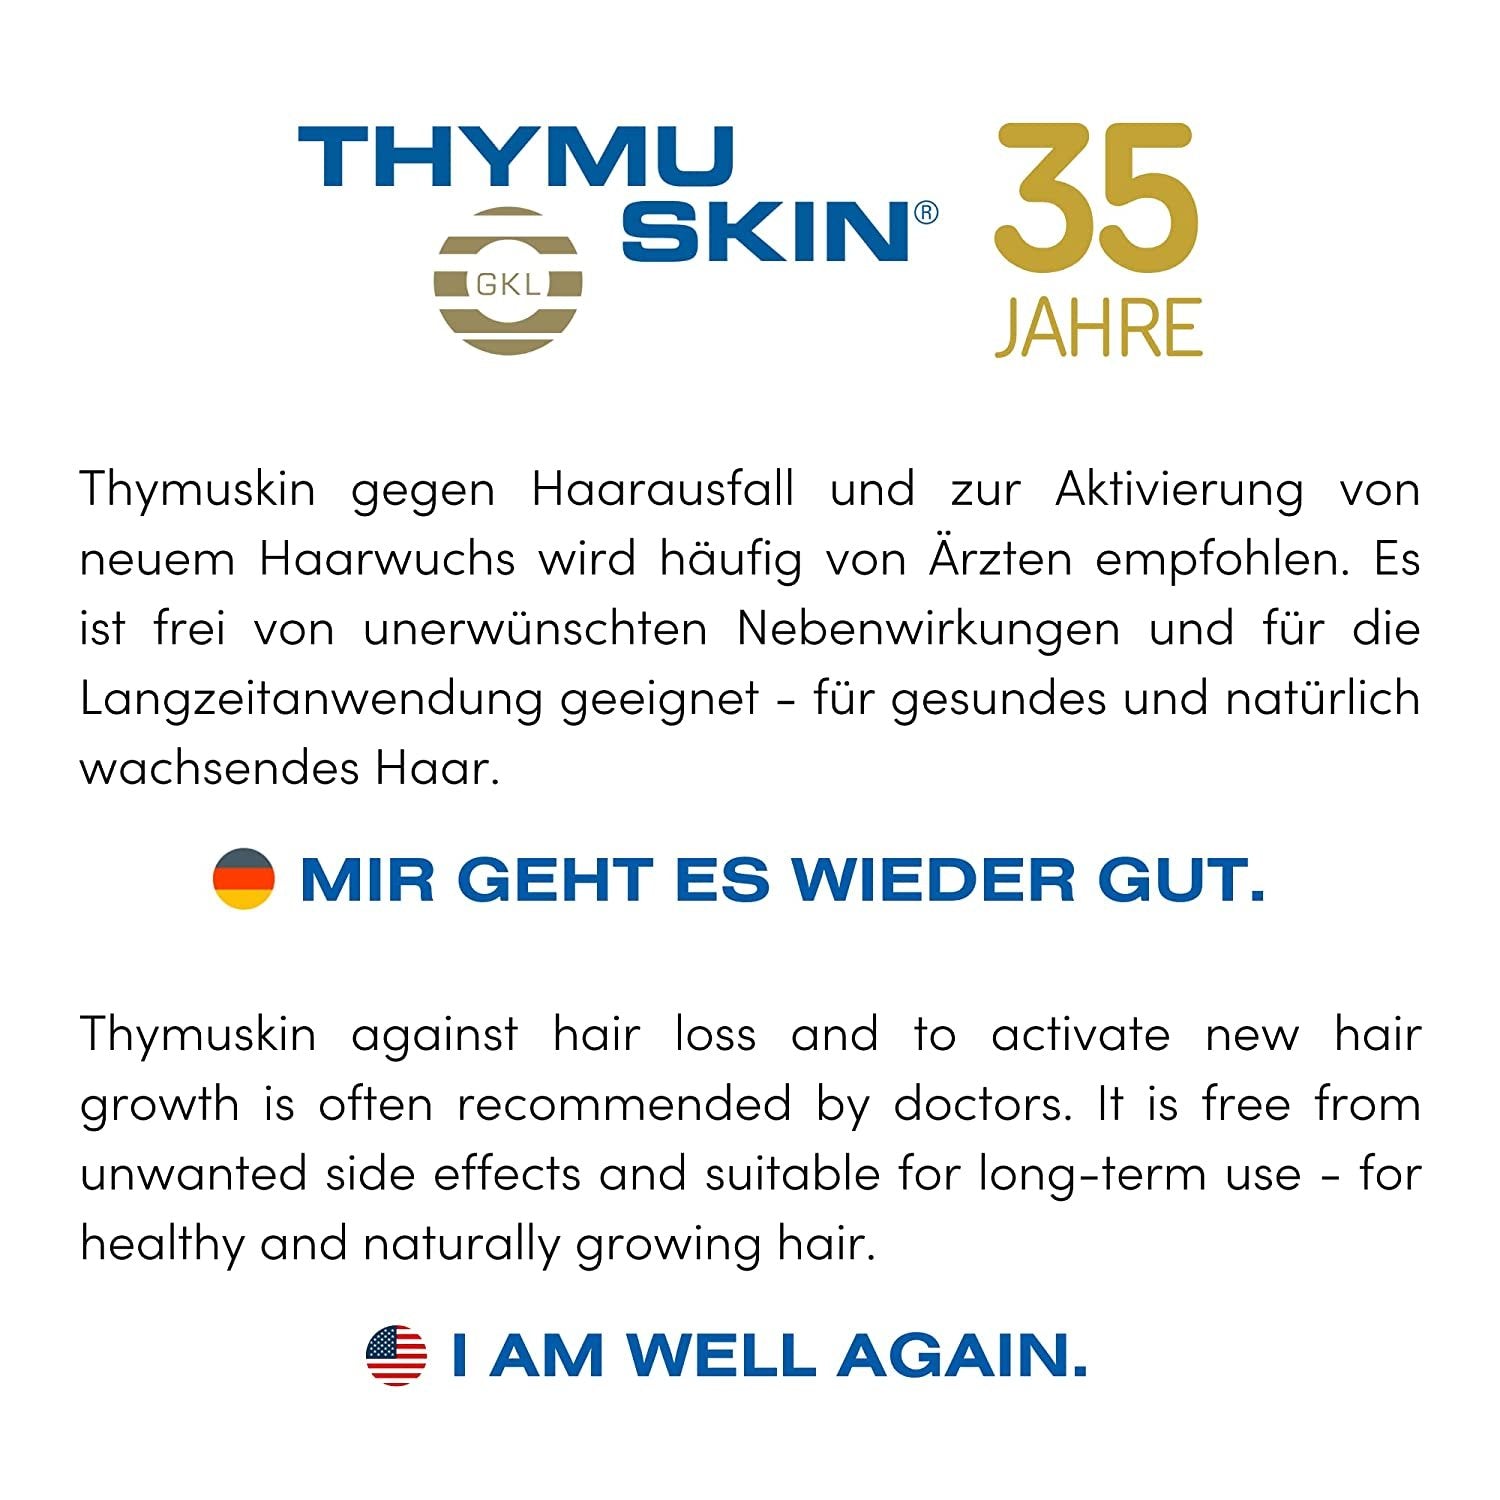 THYMUSKIN Med - Hair Care Peptides Shampoo (Step #1) for Hair Growth Due to Hair Loss - for Sensitive Hair and Scalp Conditions where Balding is Already Present